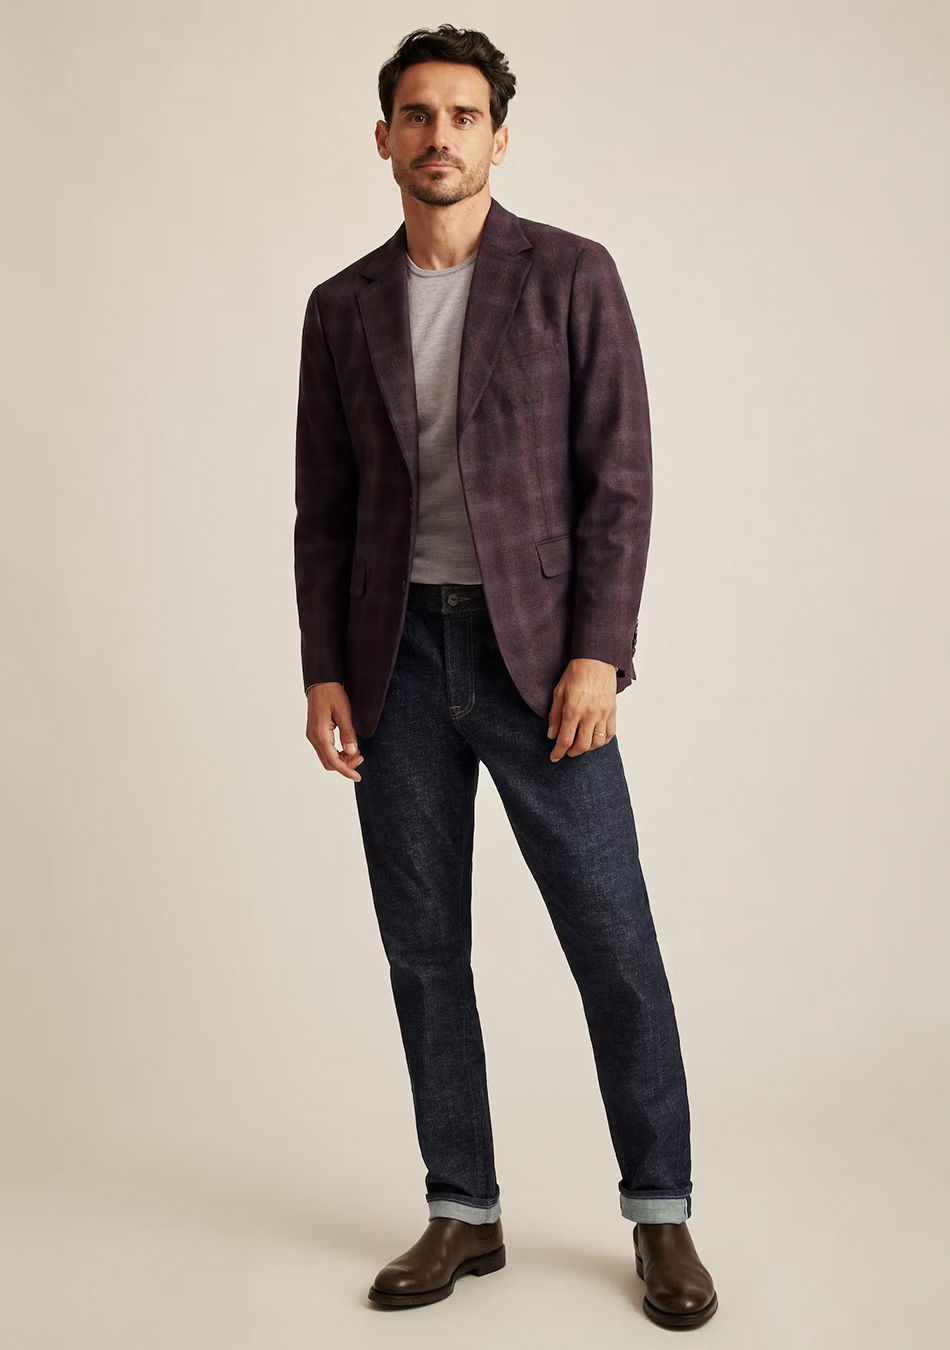 Plum burgundy blazer, grey T-shirt, navy jeans, and brown Chelsea boots